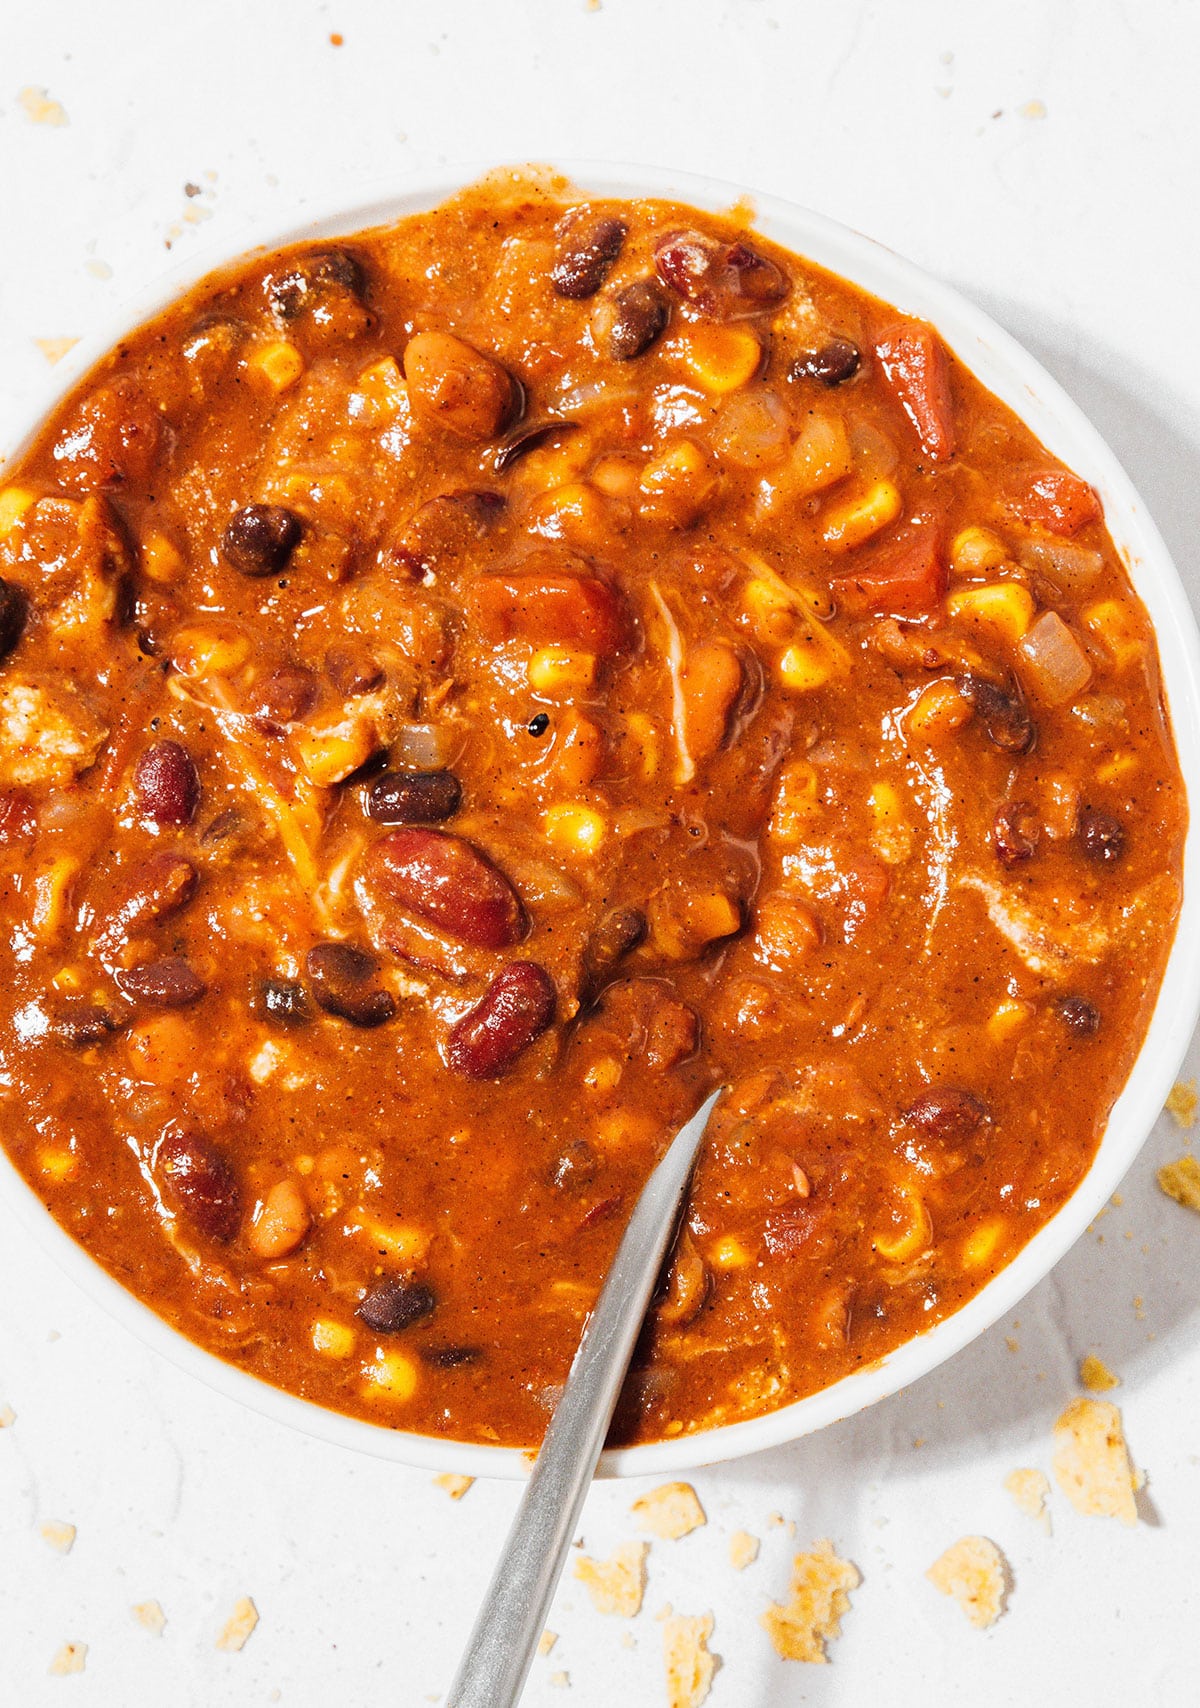 Vegetarian chili with a spoon.